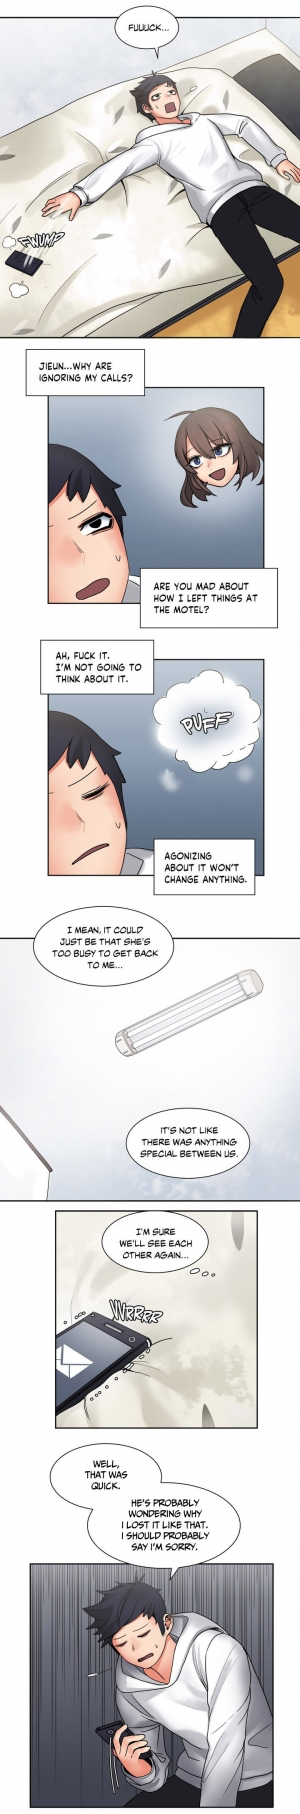 [Gaehoju, Gunnermul] The Girl That Got Stuck in the Wall Ch.11/11 [COMPLETED] [English] [Hentai Universe] - Page 83